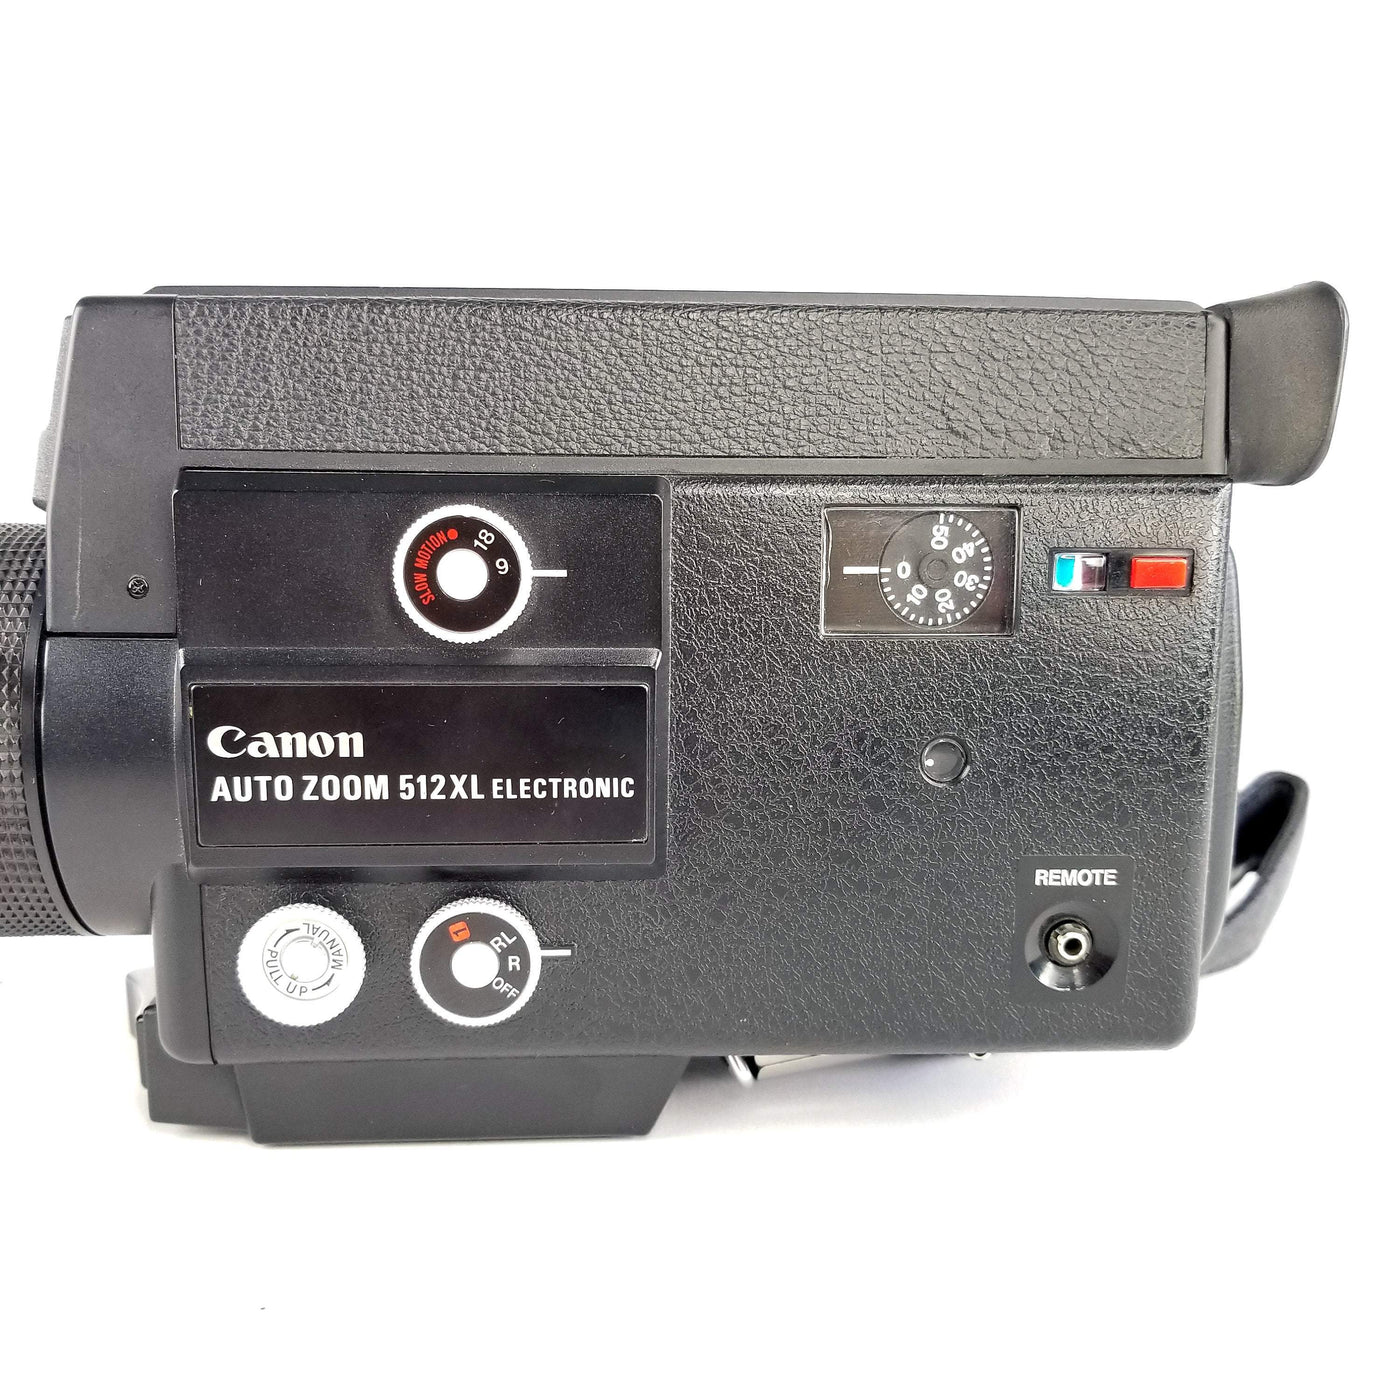 Canon Auto Zoom 512XL Electronic Super 8 Camera Professionally Serviced and Fully Tested Super 8 Cameras Canon 